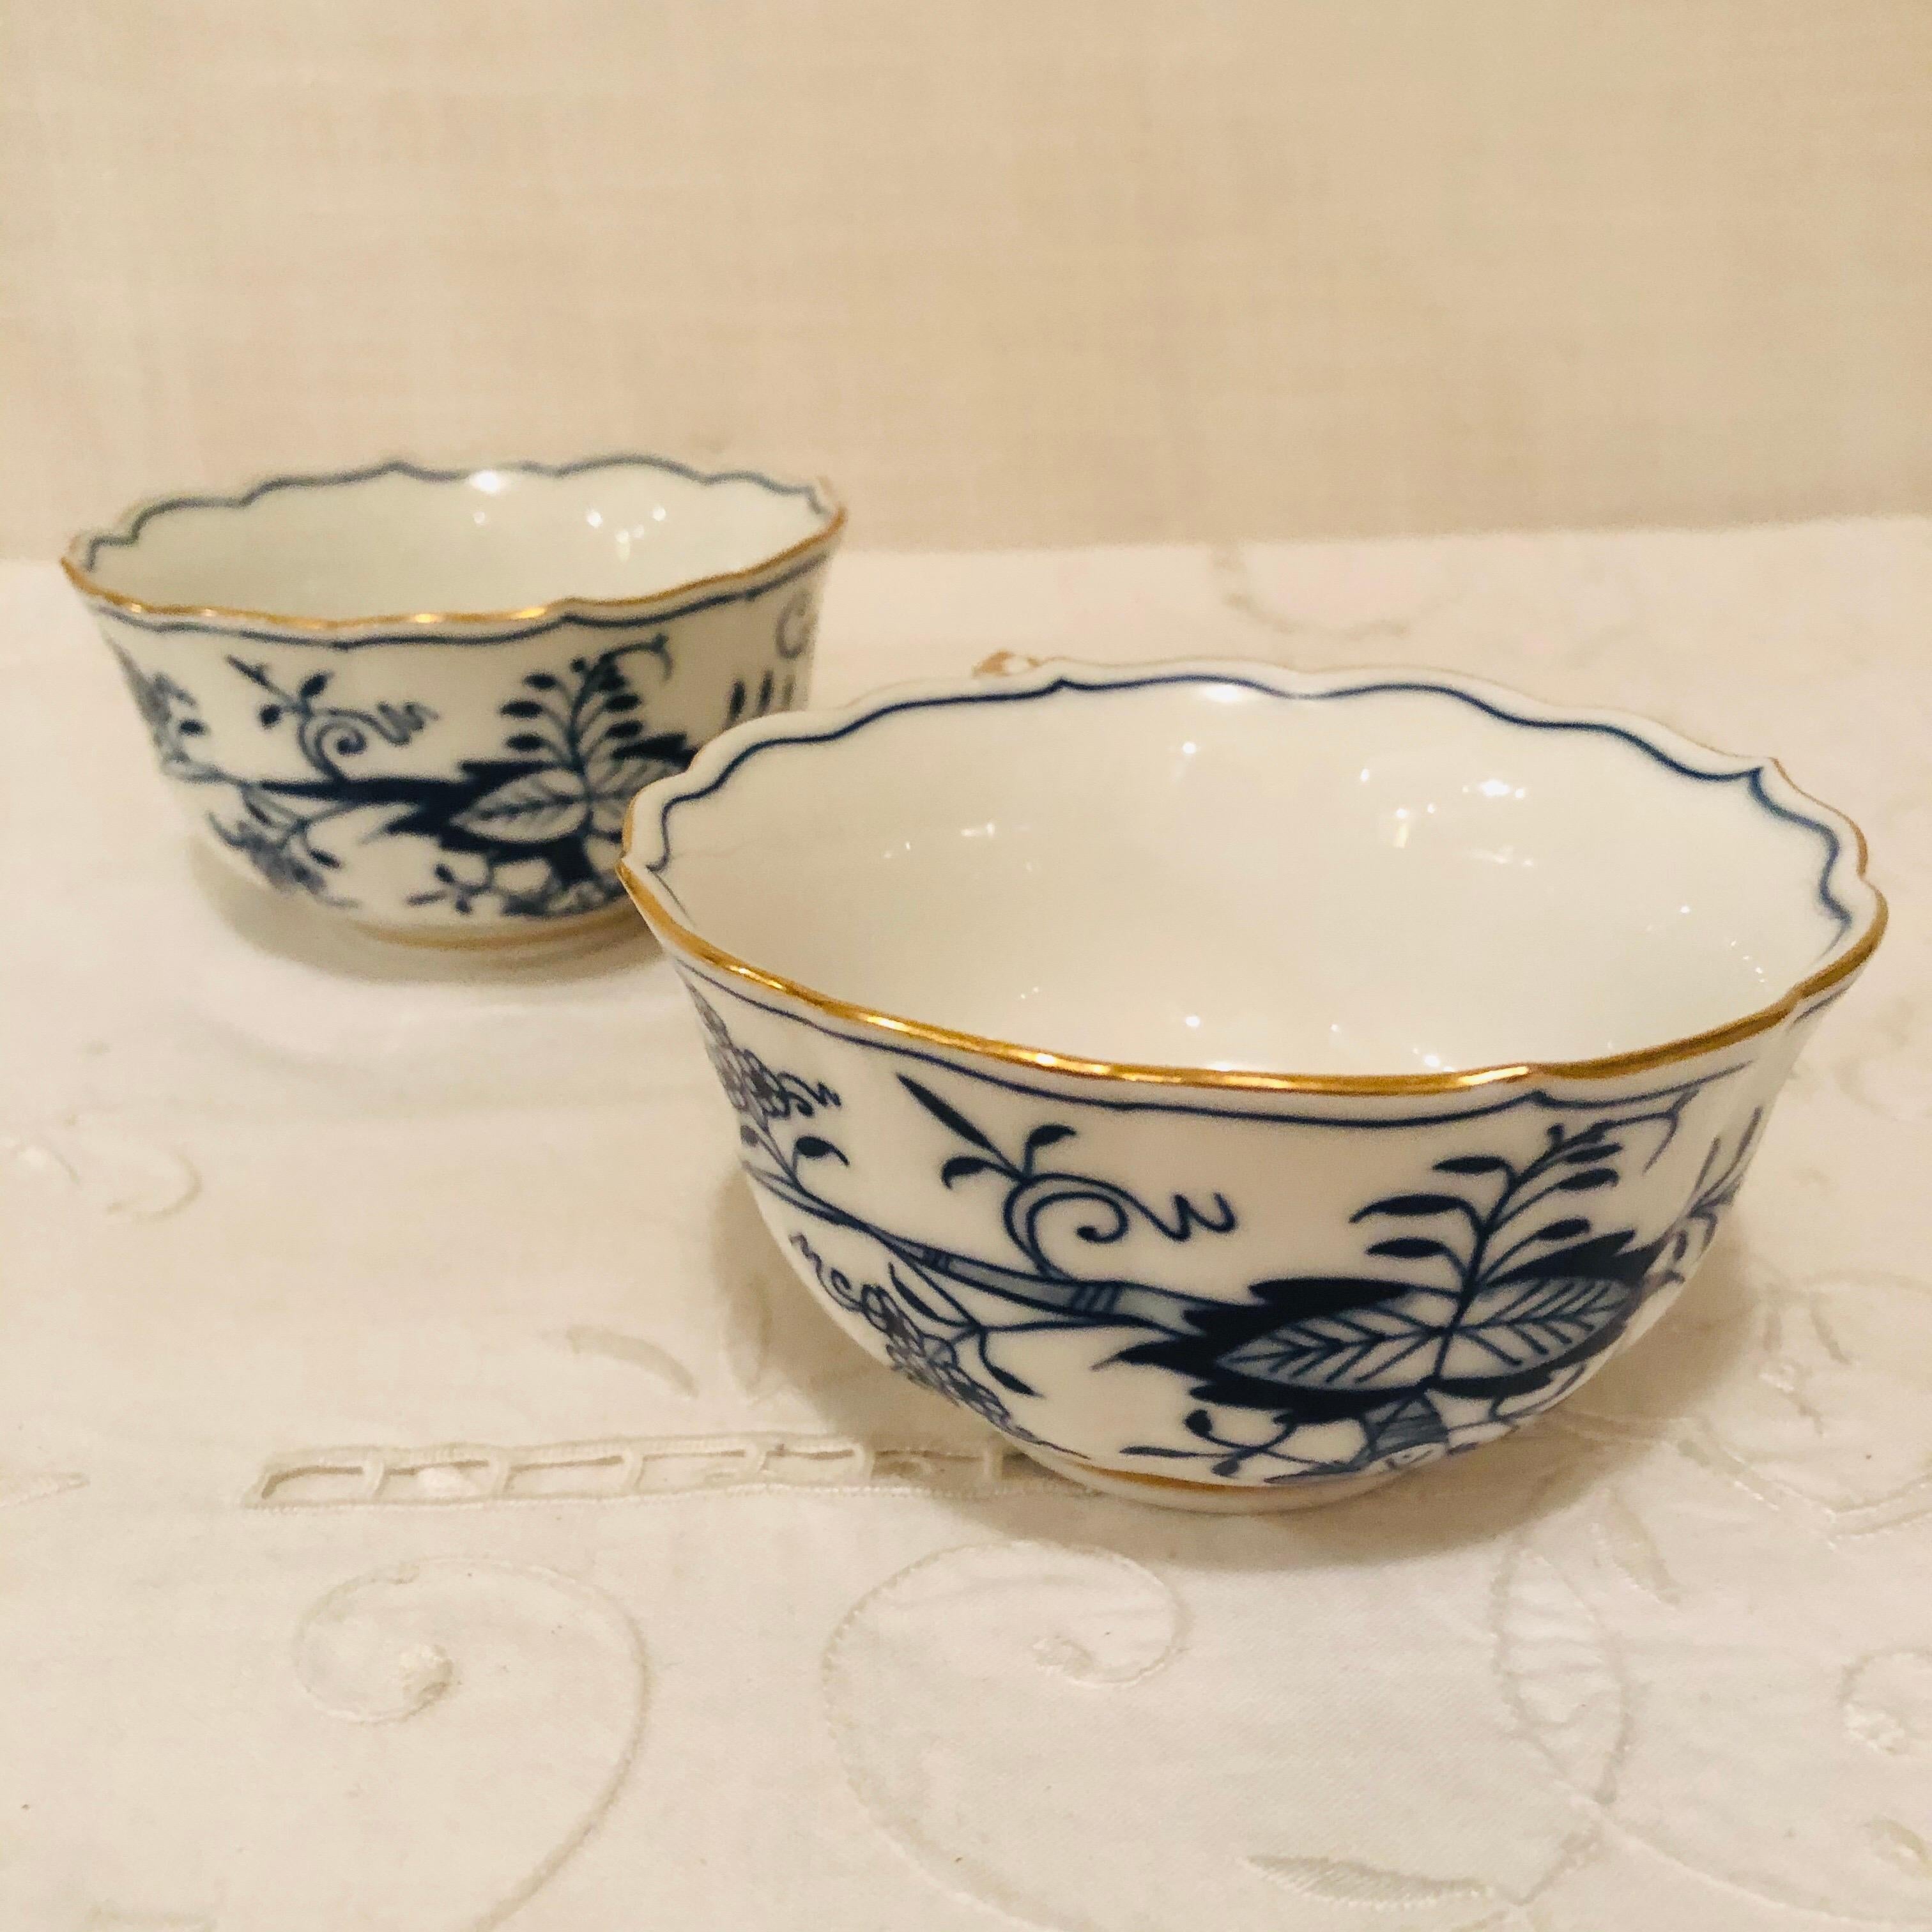 German Set of 12 Meissen Blue Onion Teacups and Saucers with a Gold Rim